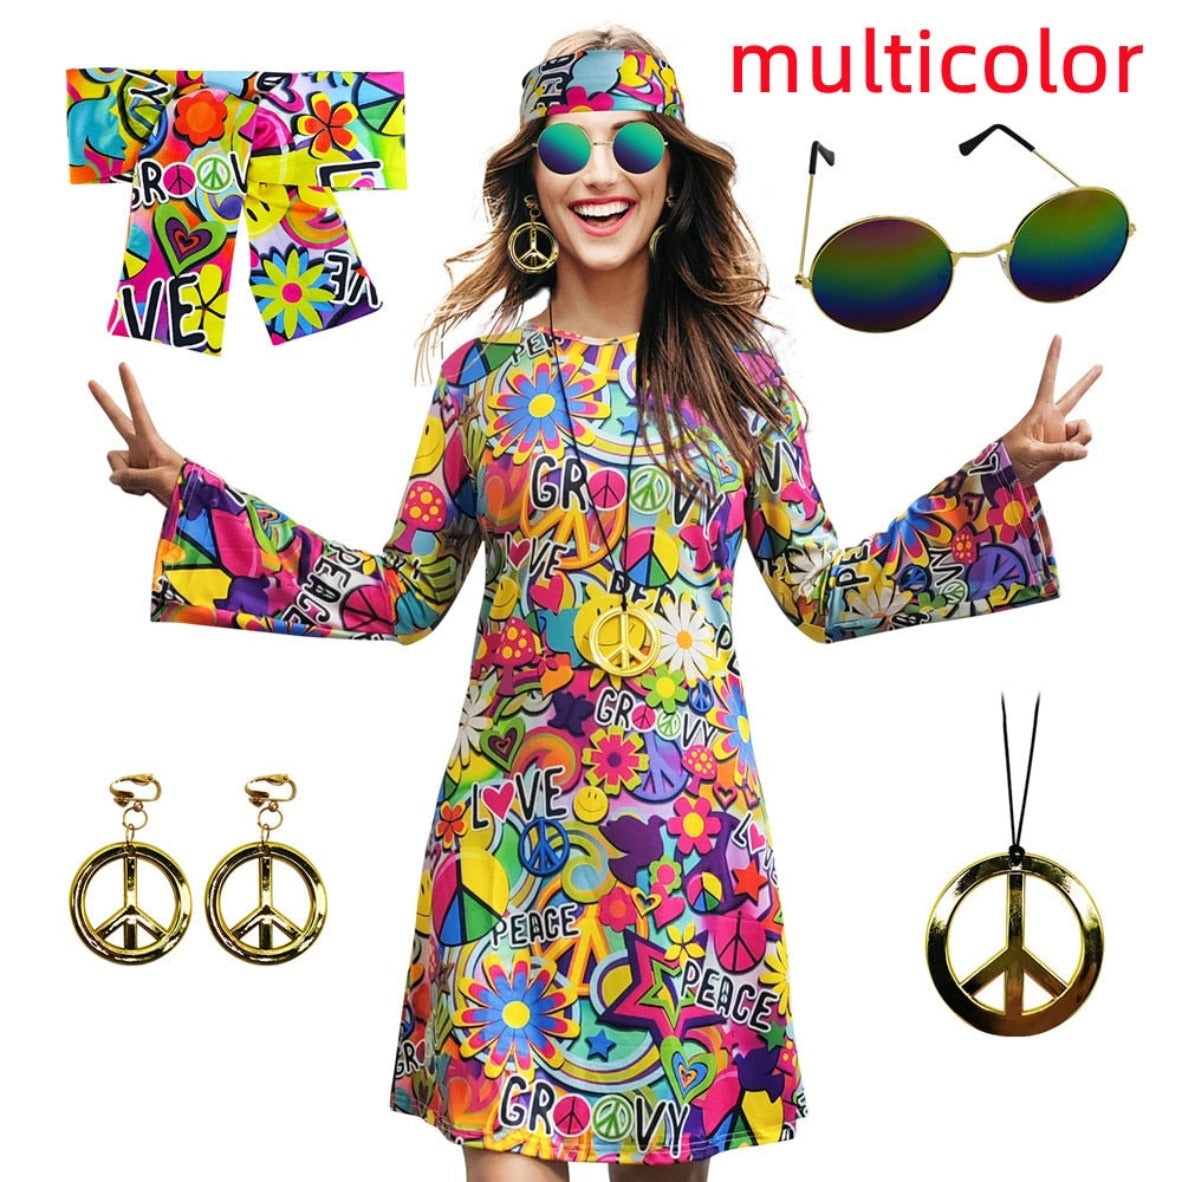 Hippy Heavenly Dress with Accessories - Festigal